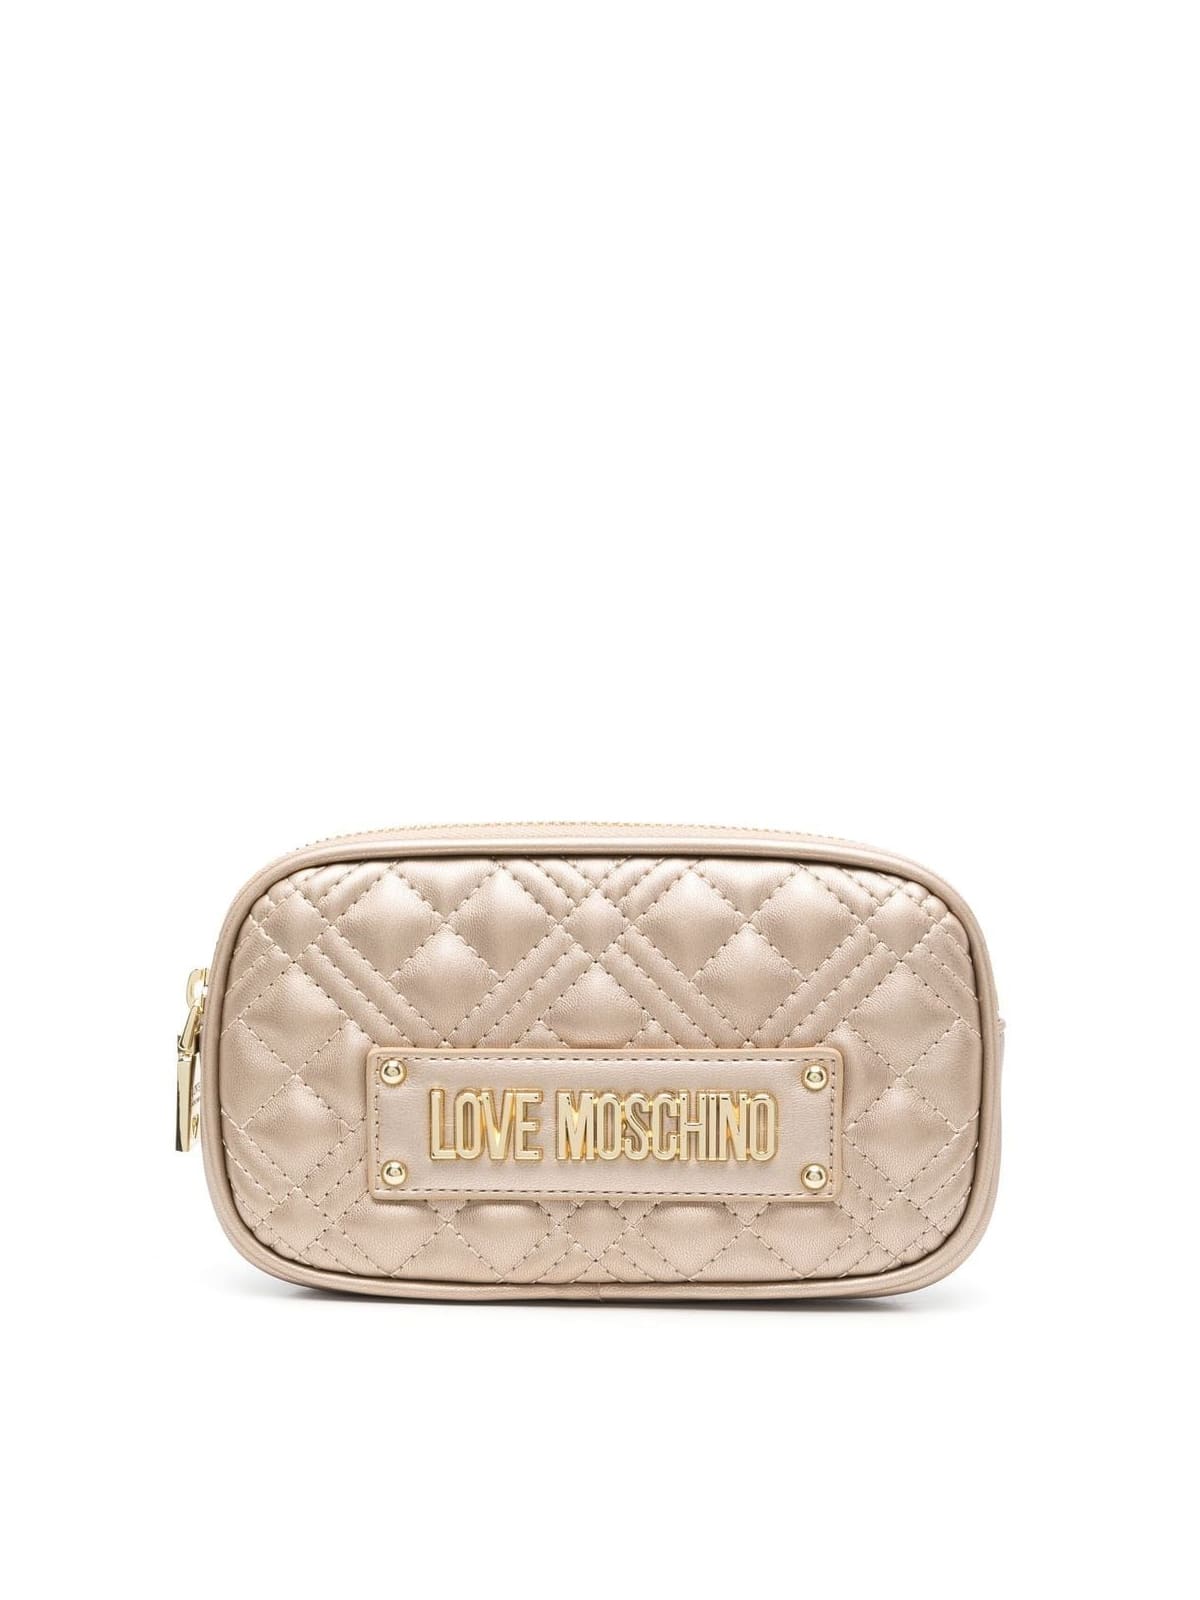 Love Moschino Quilted Pu Bag